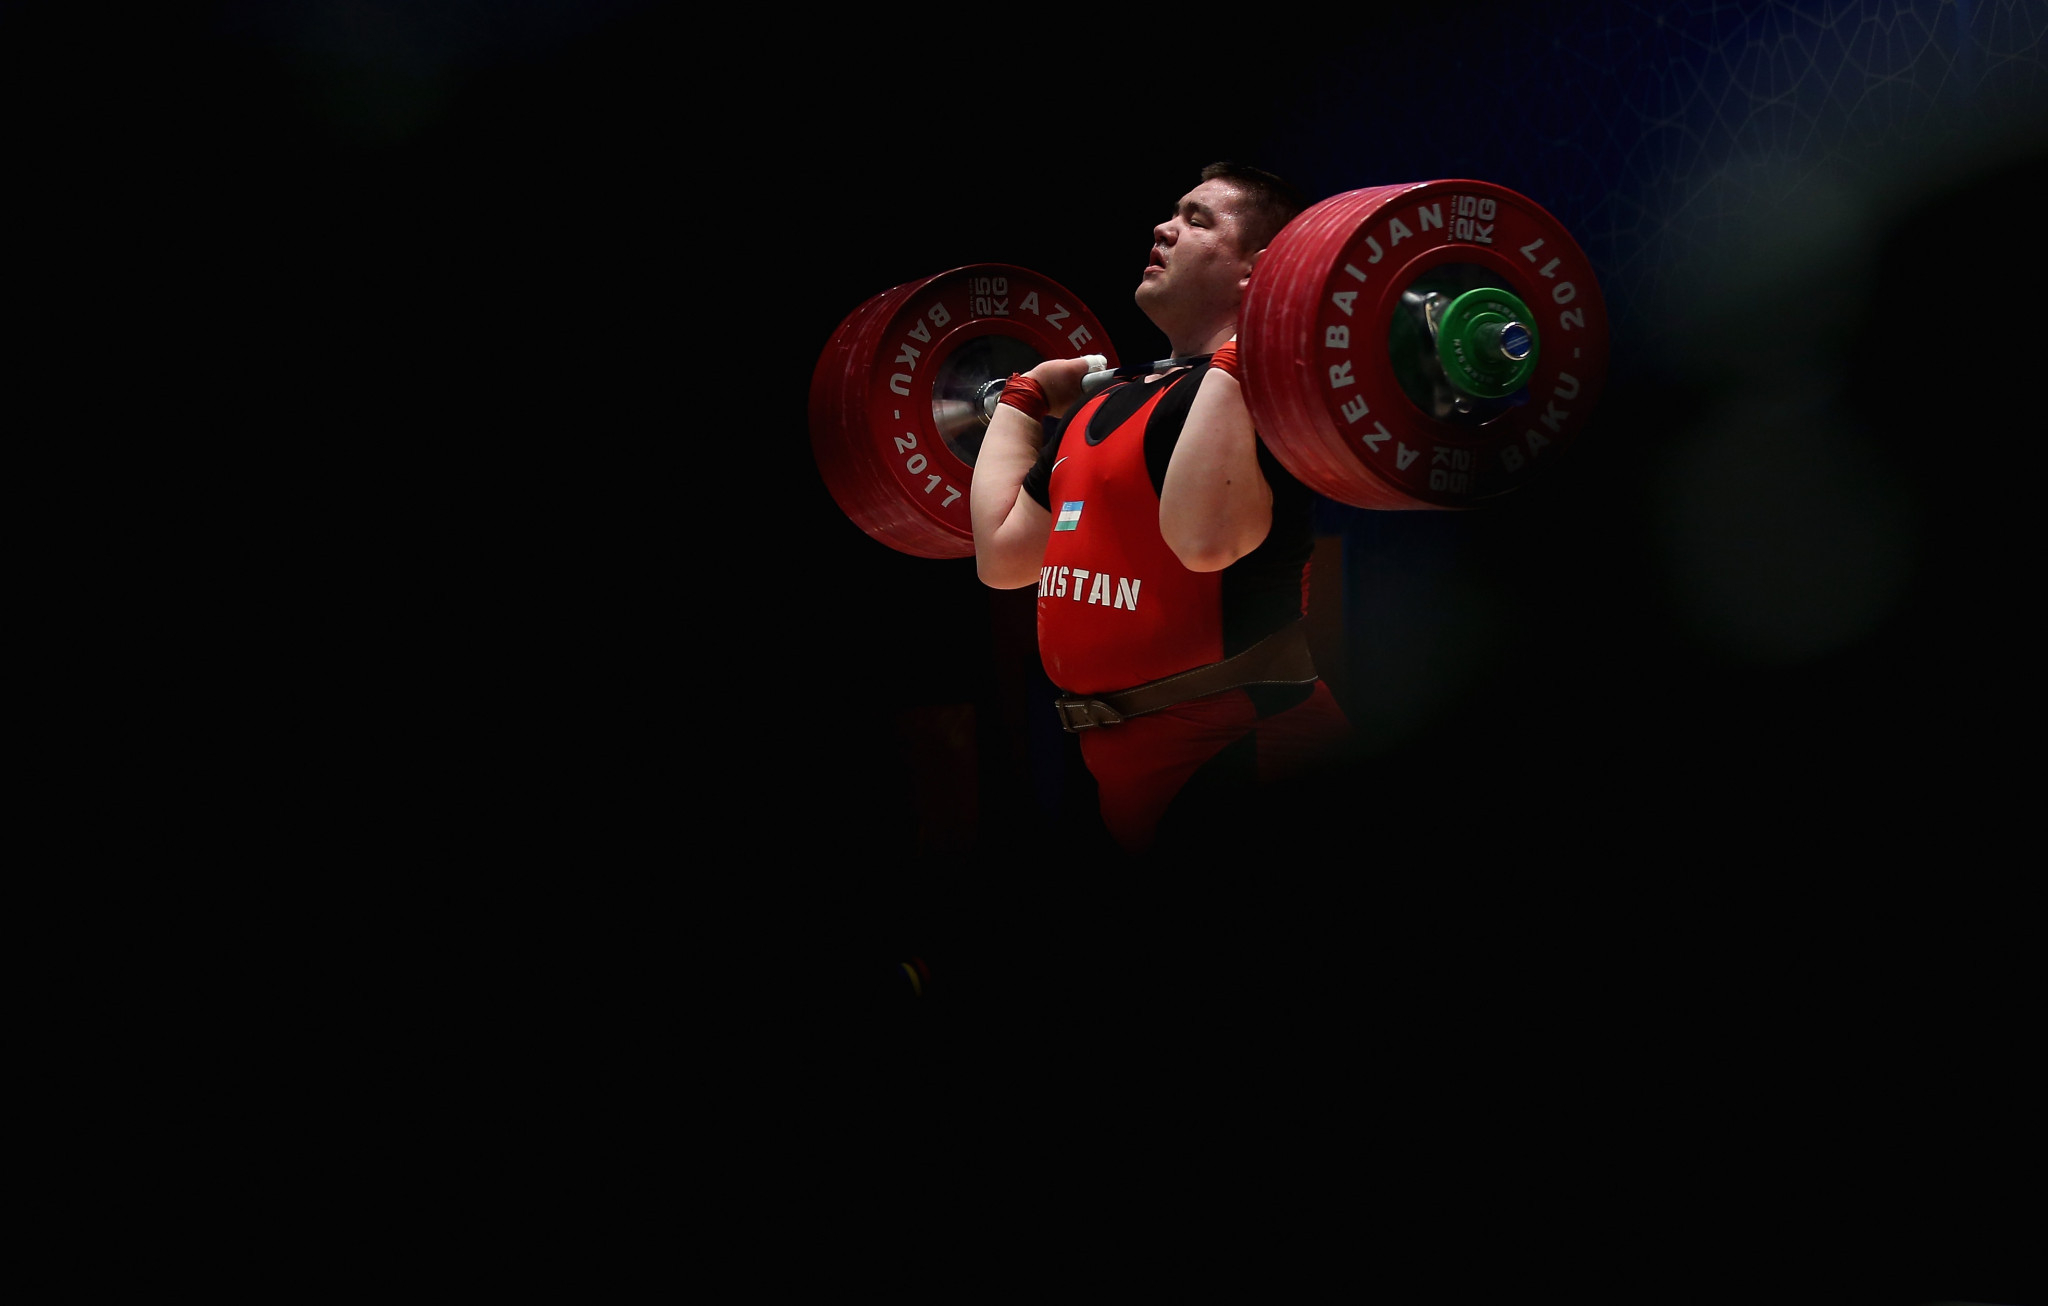 2048x1306 Brazil's Reis wins landmark weightlifting medal after rival's disqualificati